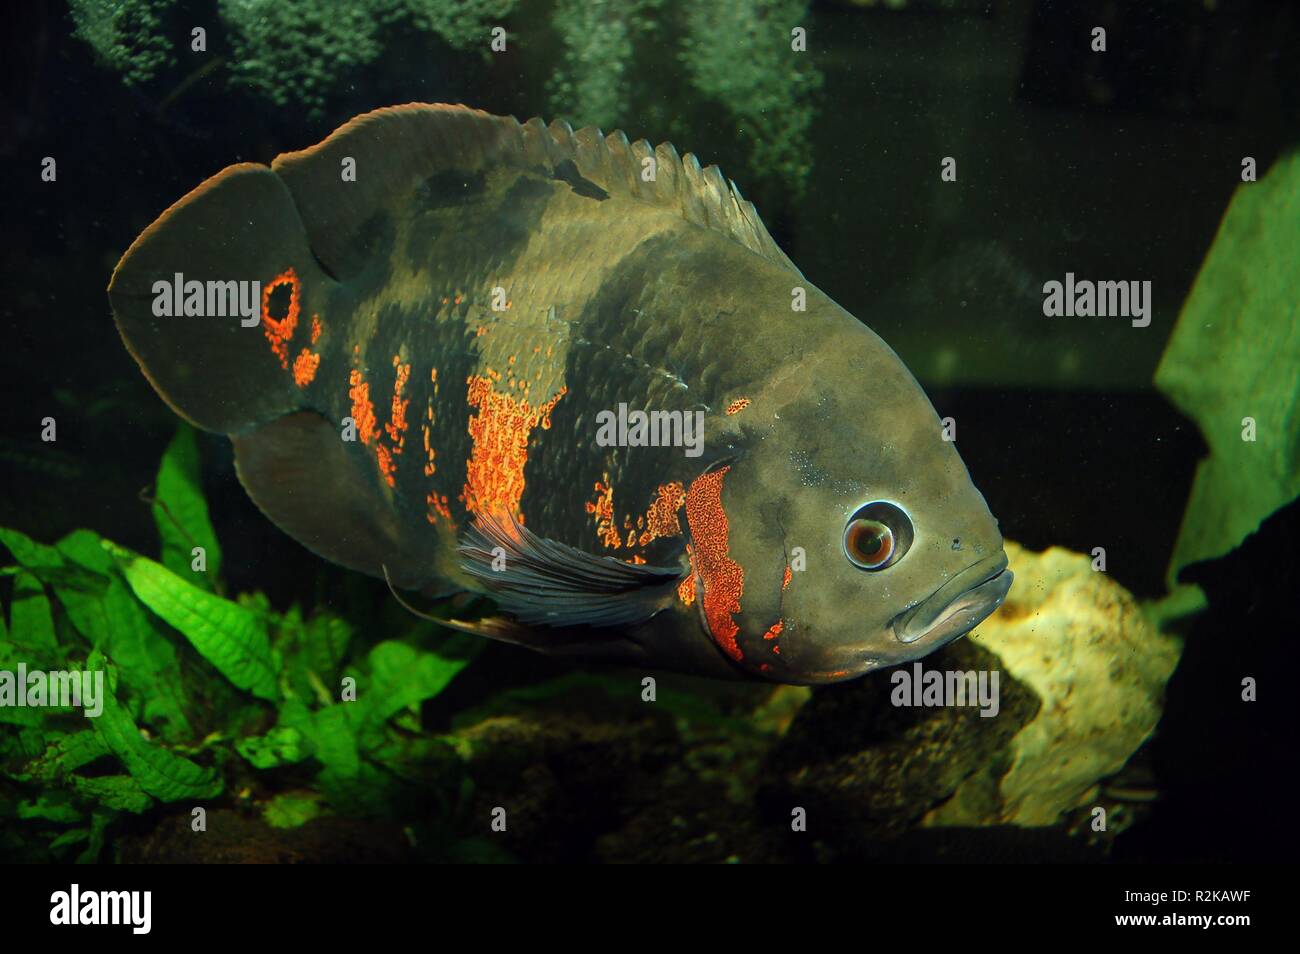 the peacock cichlid (astronotus ocellatus),also known as red oskar,is a freshwater ornamental fish of the cichlidae family. he comes from rivers of the amazon basin in south america. Stock Photo